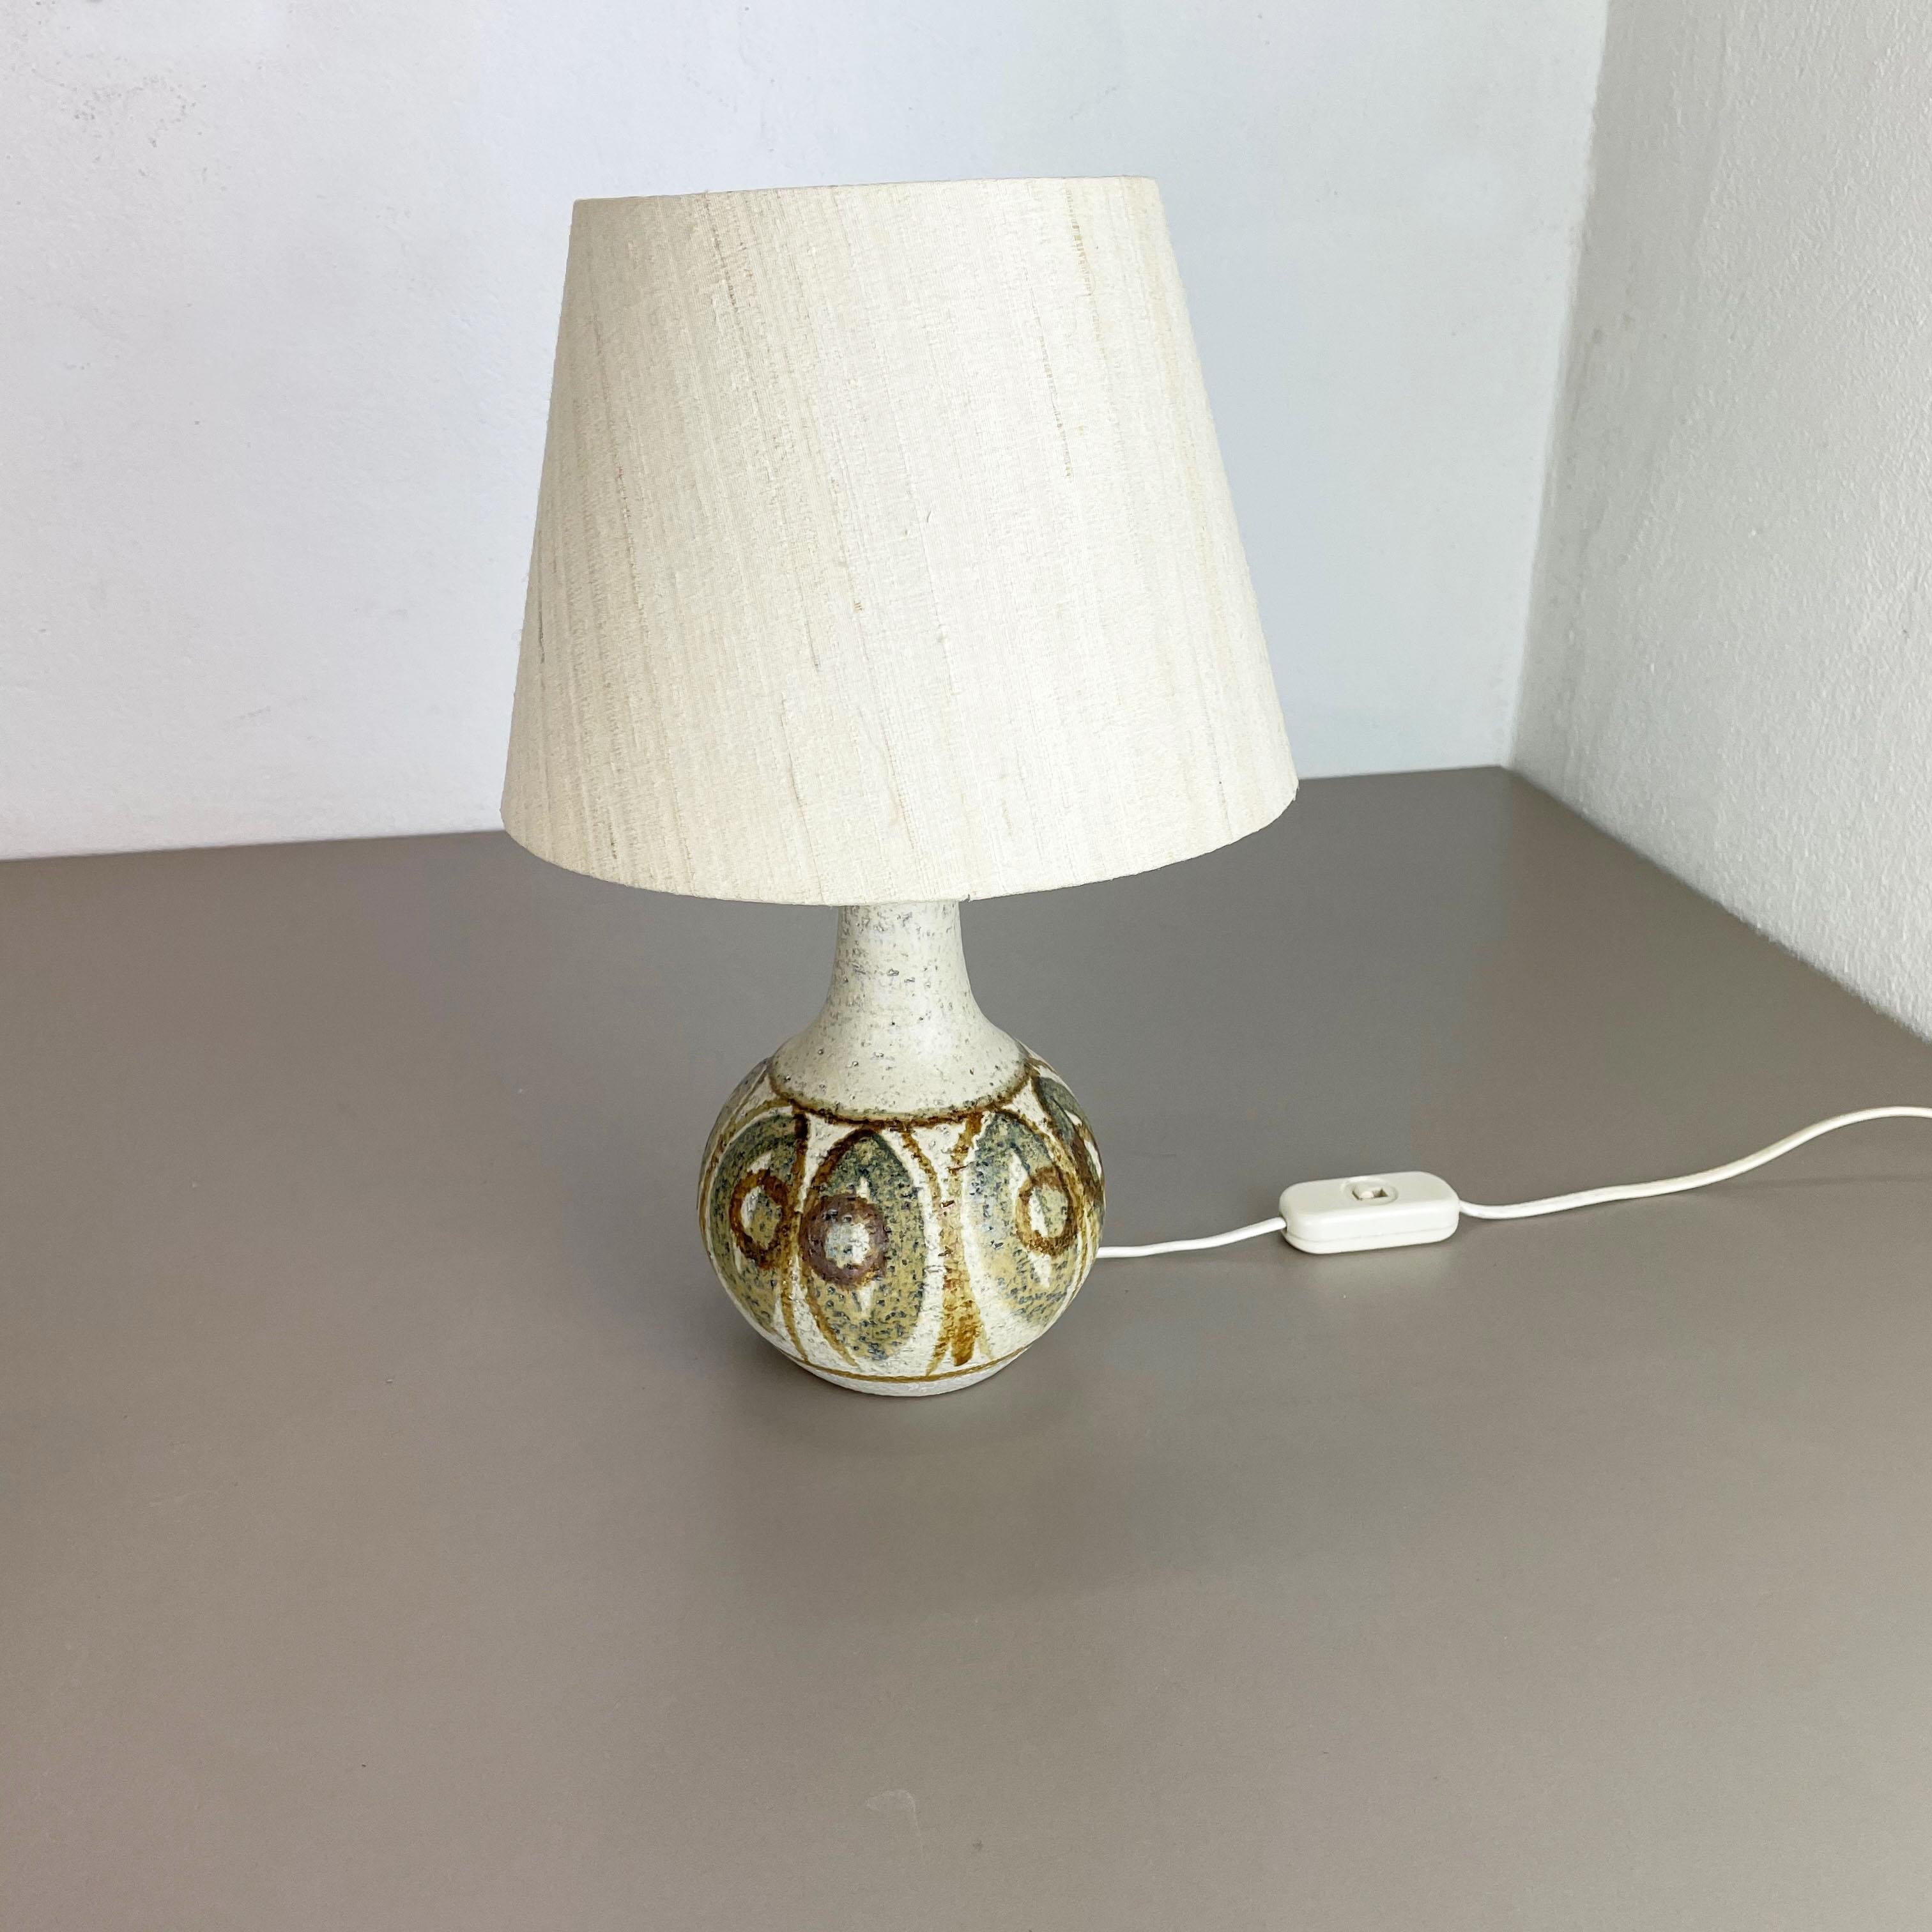 Article:

Ceramic table light base


Producer:

SOHOLM, Denmark




Decade:

1970s





This original vintage ceramic Pottery light base was designed and produced by SOHOLM in Denmark in the 1970s. It is made of solid pottery and has a nice abstract